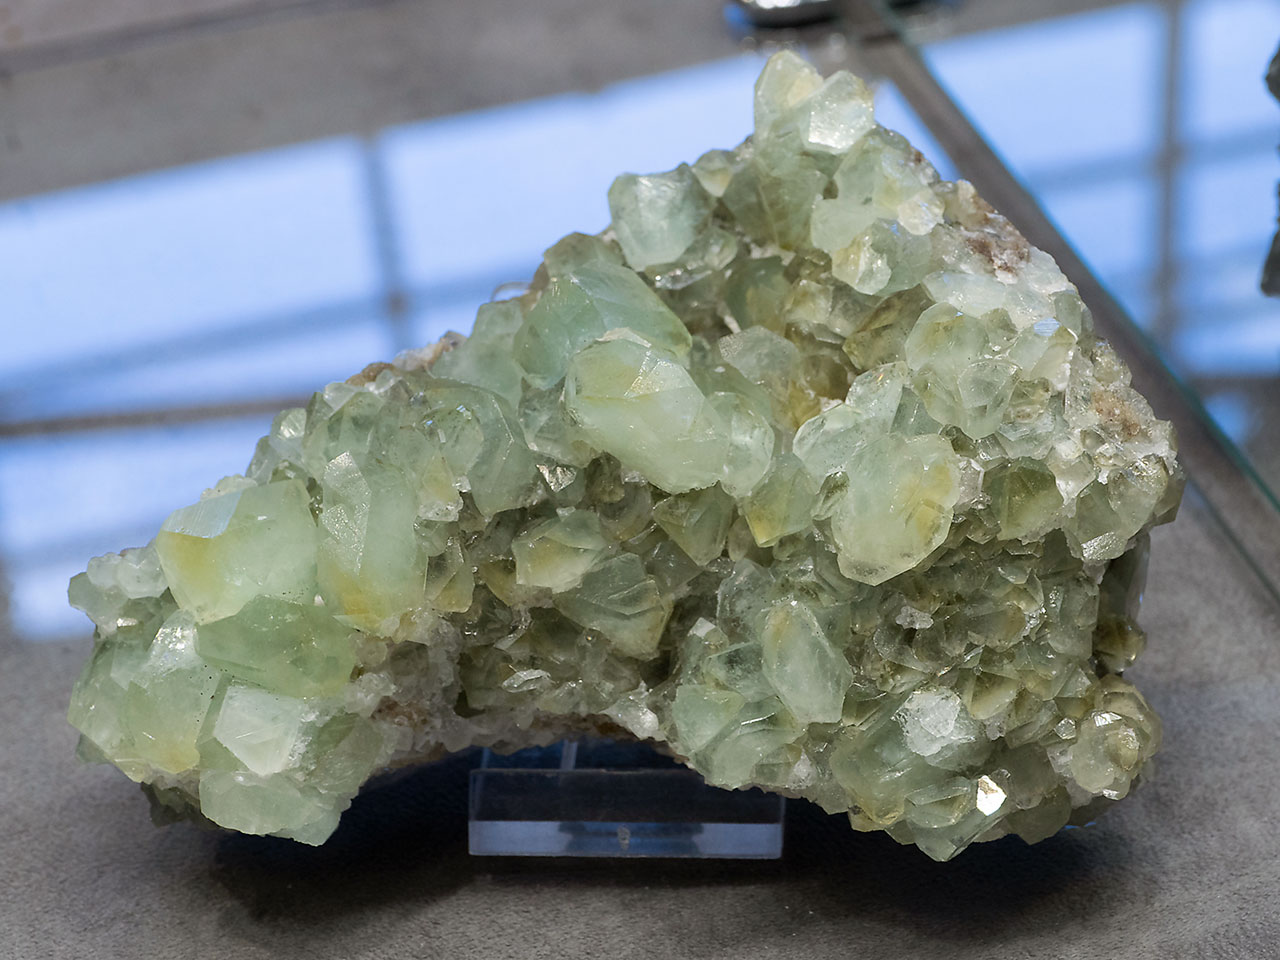 Cluster of green datolite crystals from Dalnegorsk, Russia